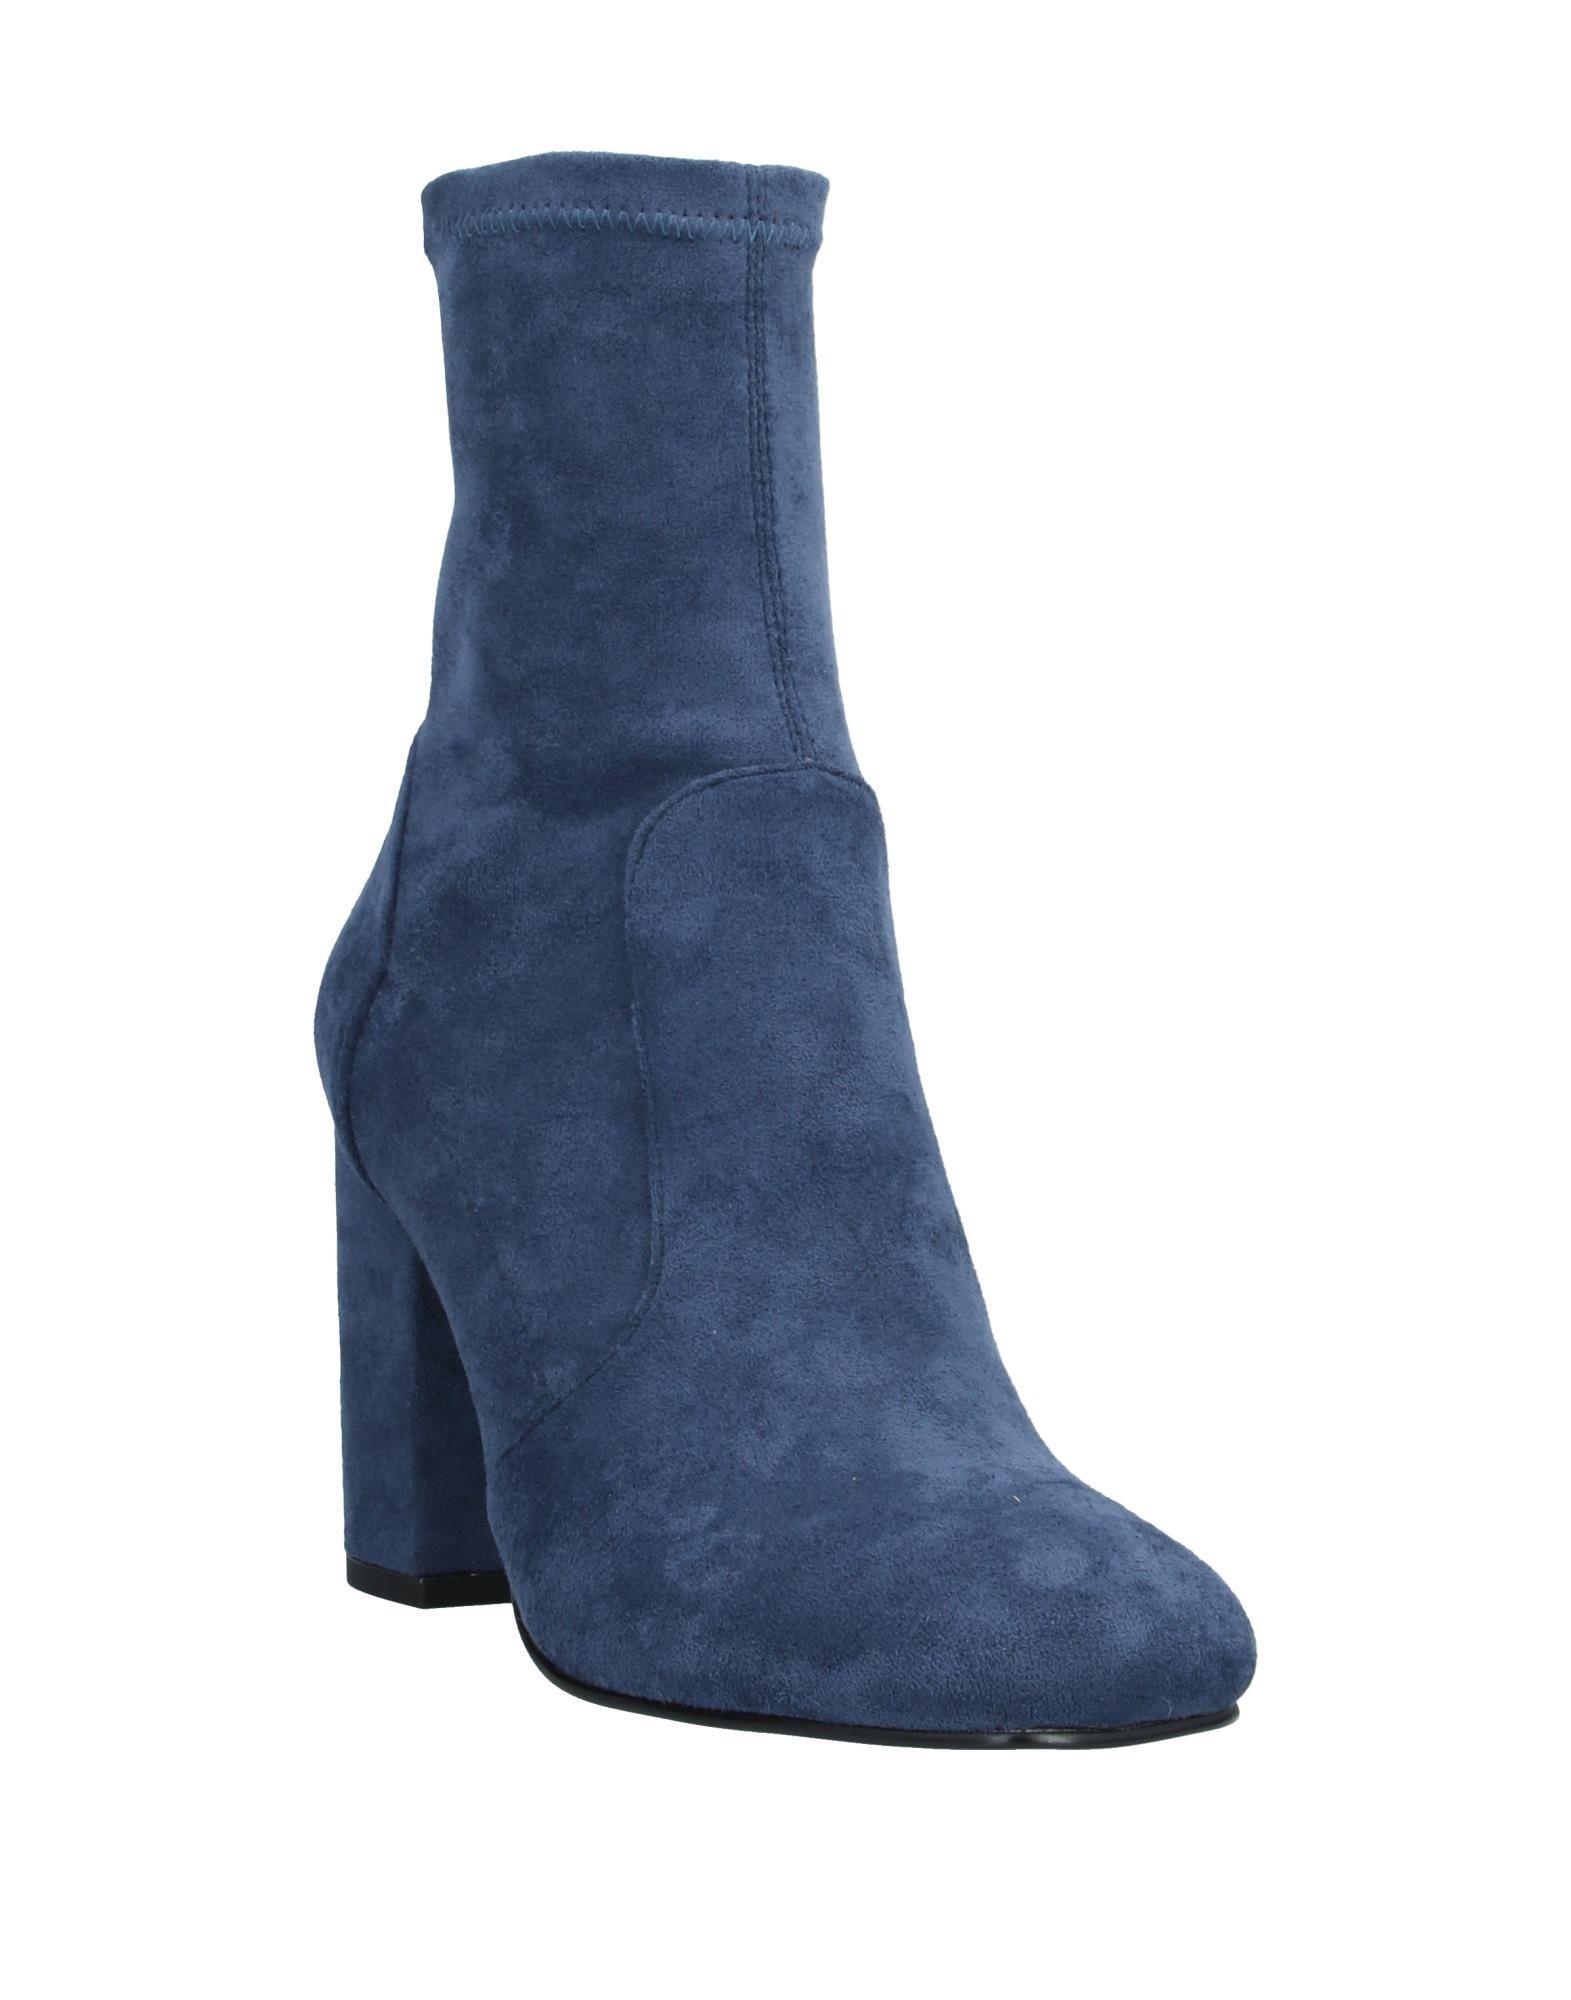 Bibi Lou Suede Ankle Boots in Slate Blue (Blue) - Lyst